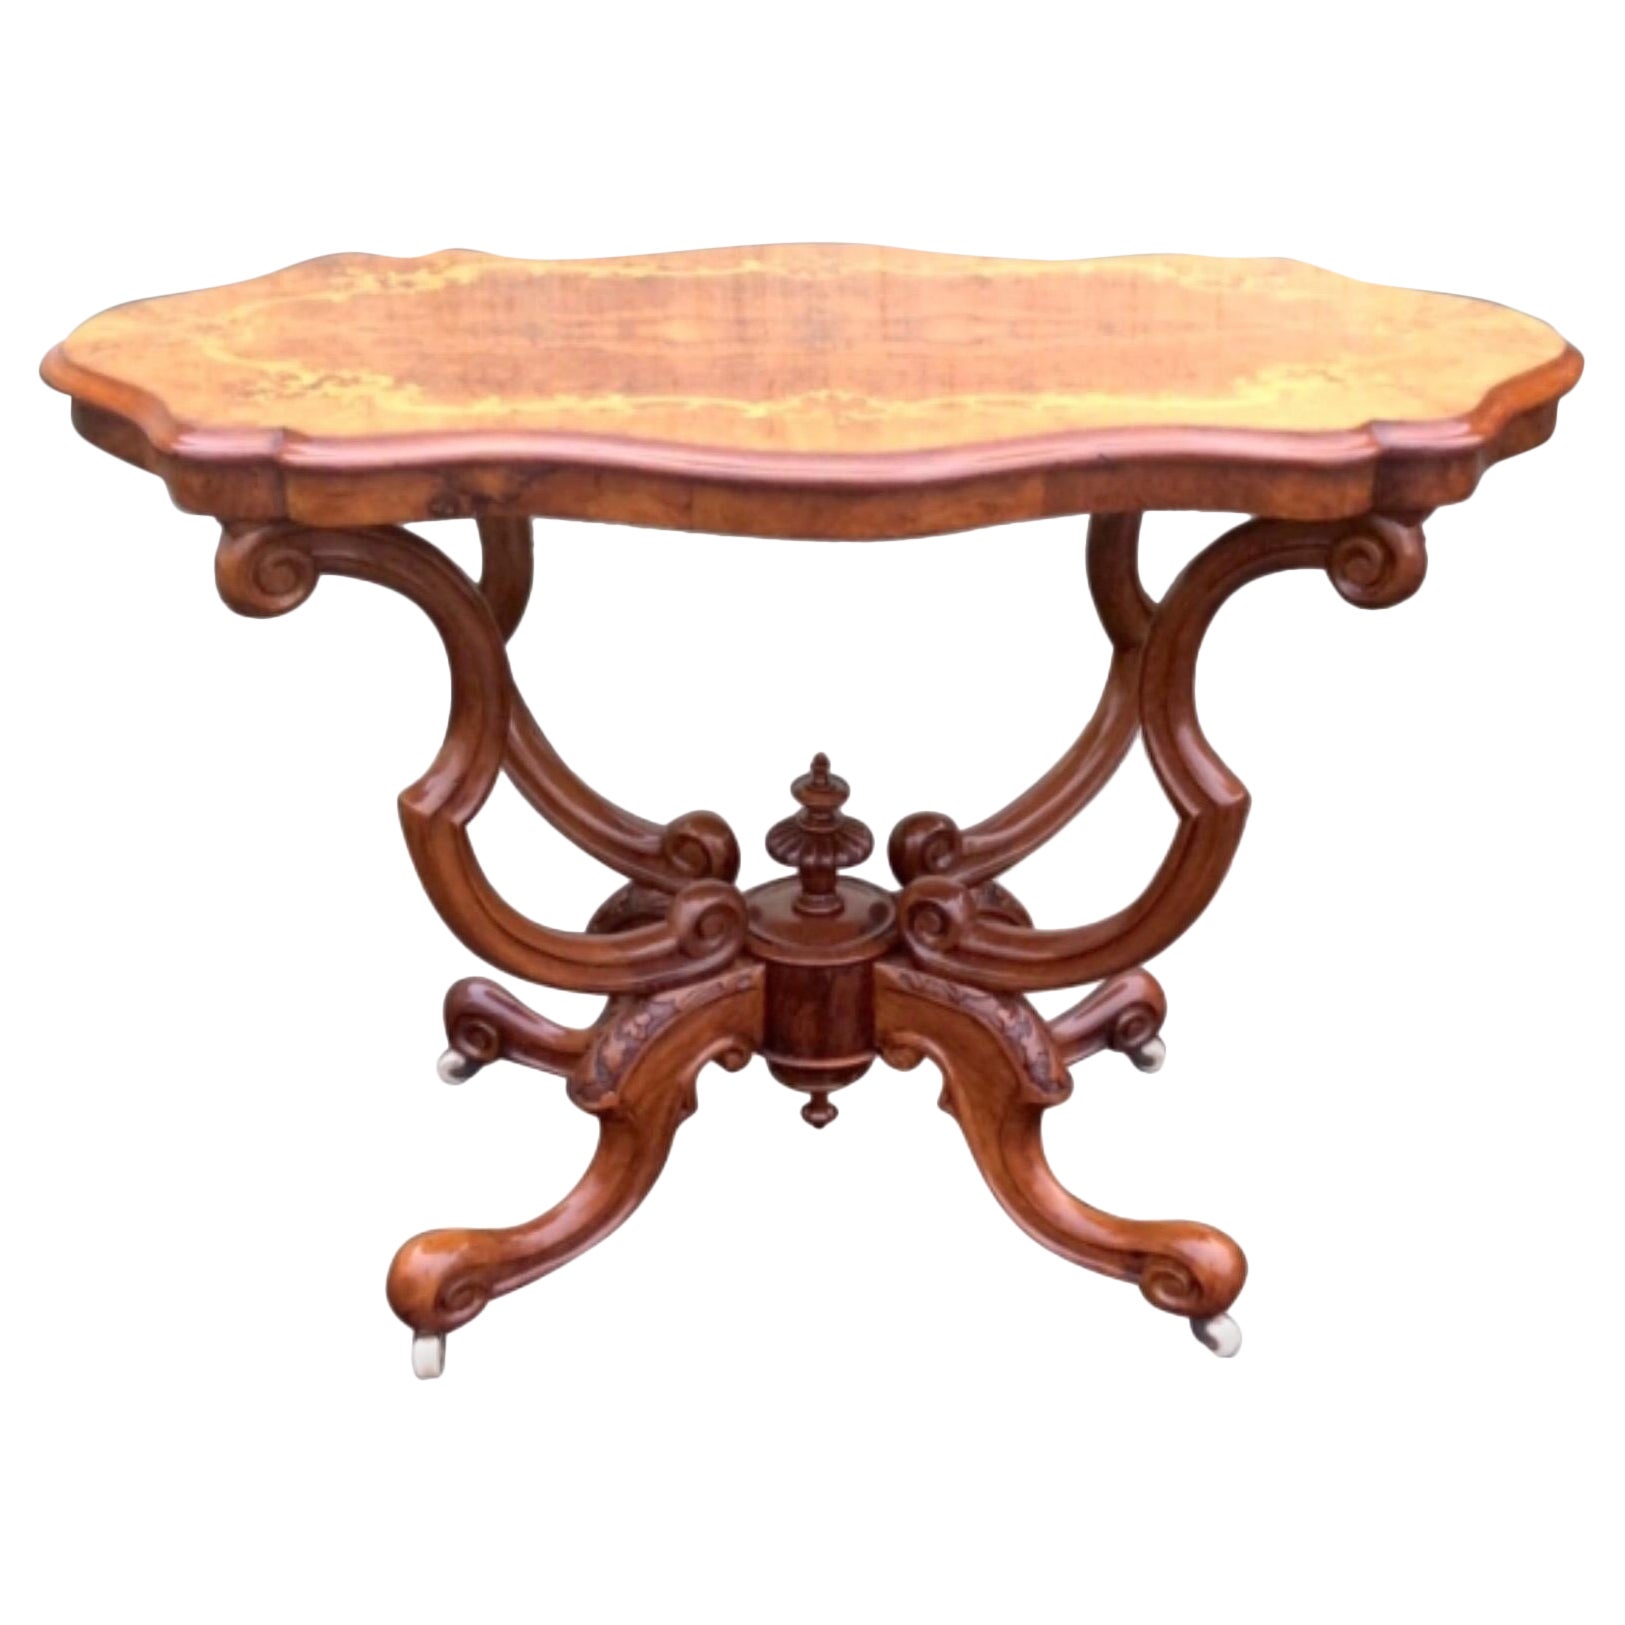 Antique Marquetry Inlaid Burr Walnut Window Table, Occasional Table For Sale